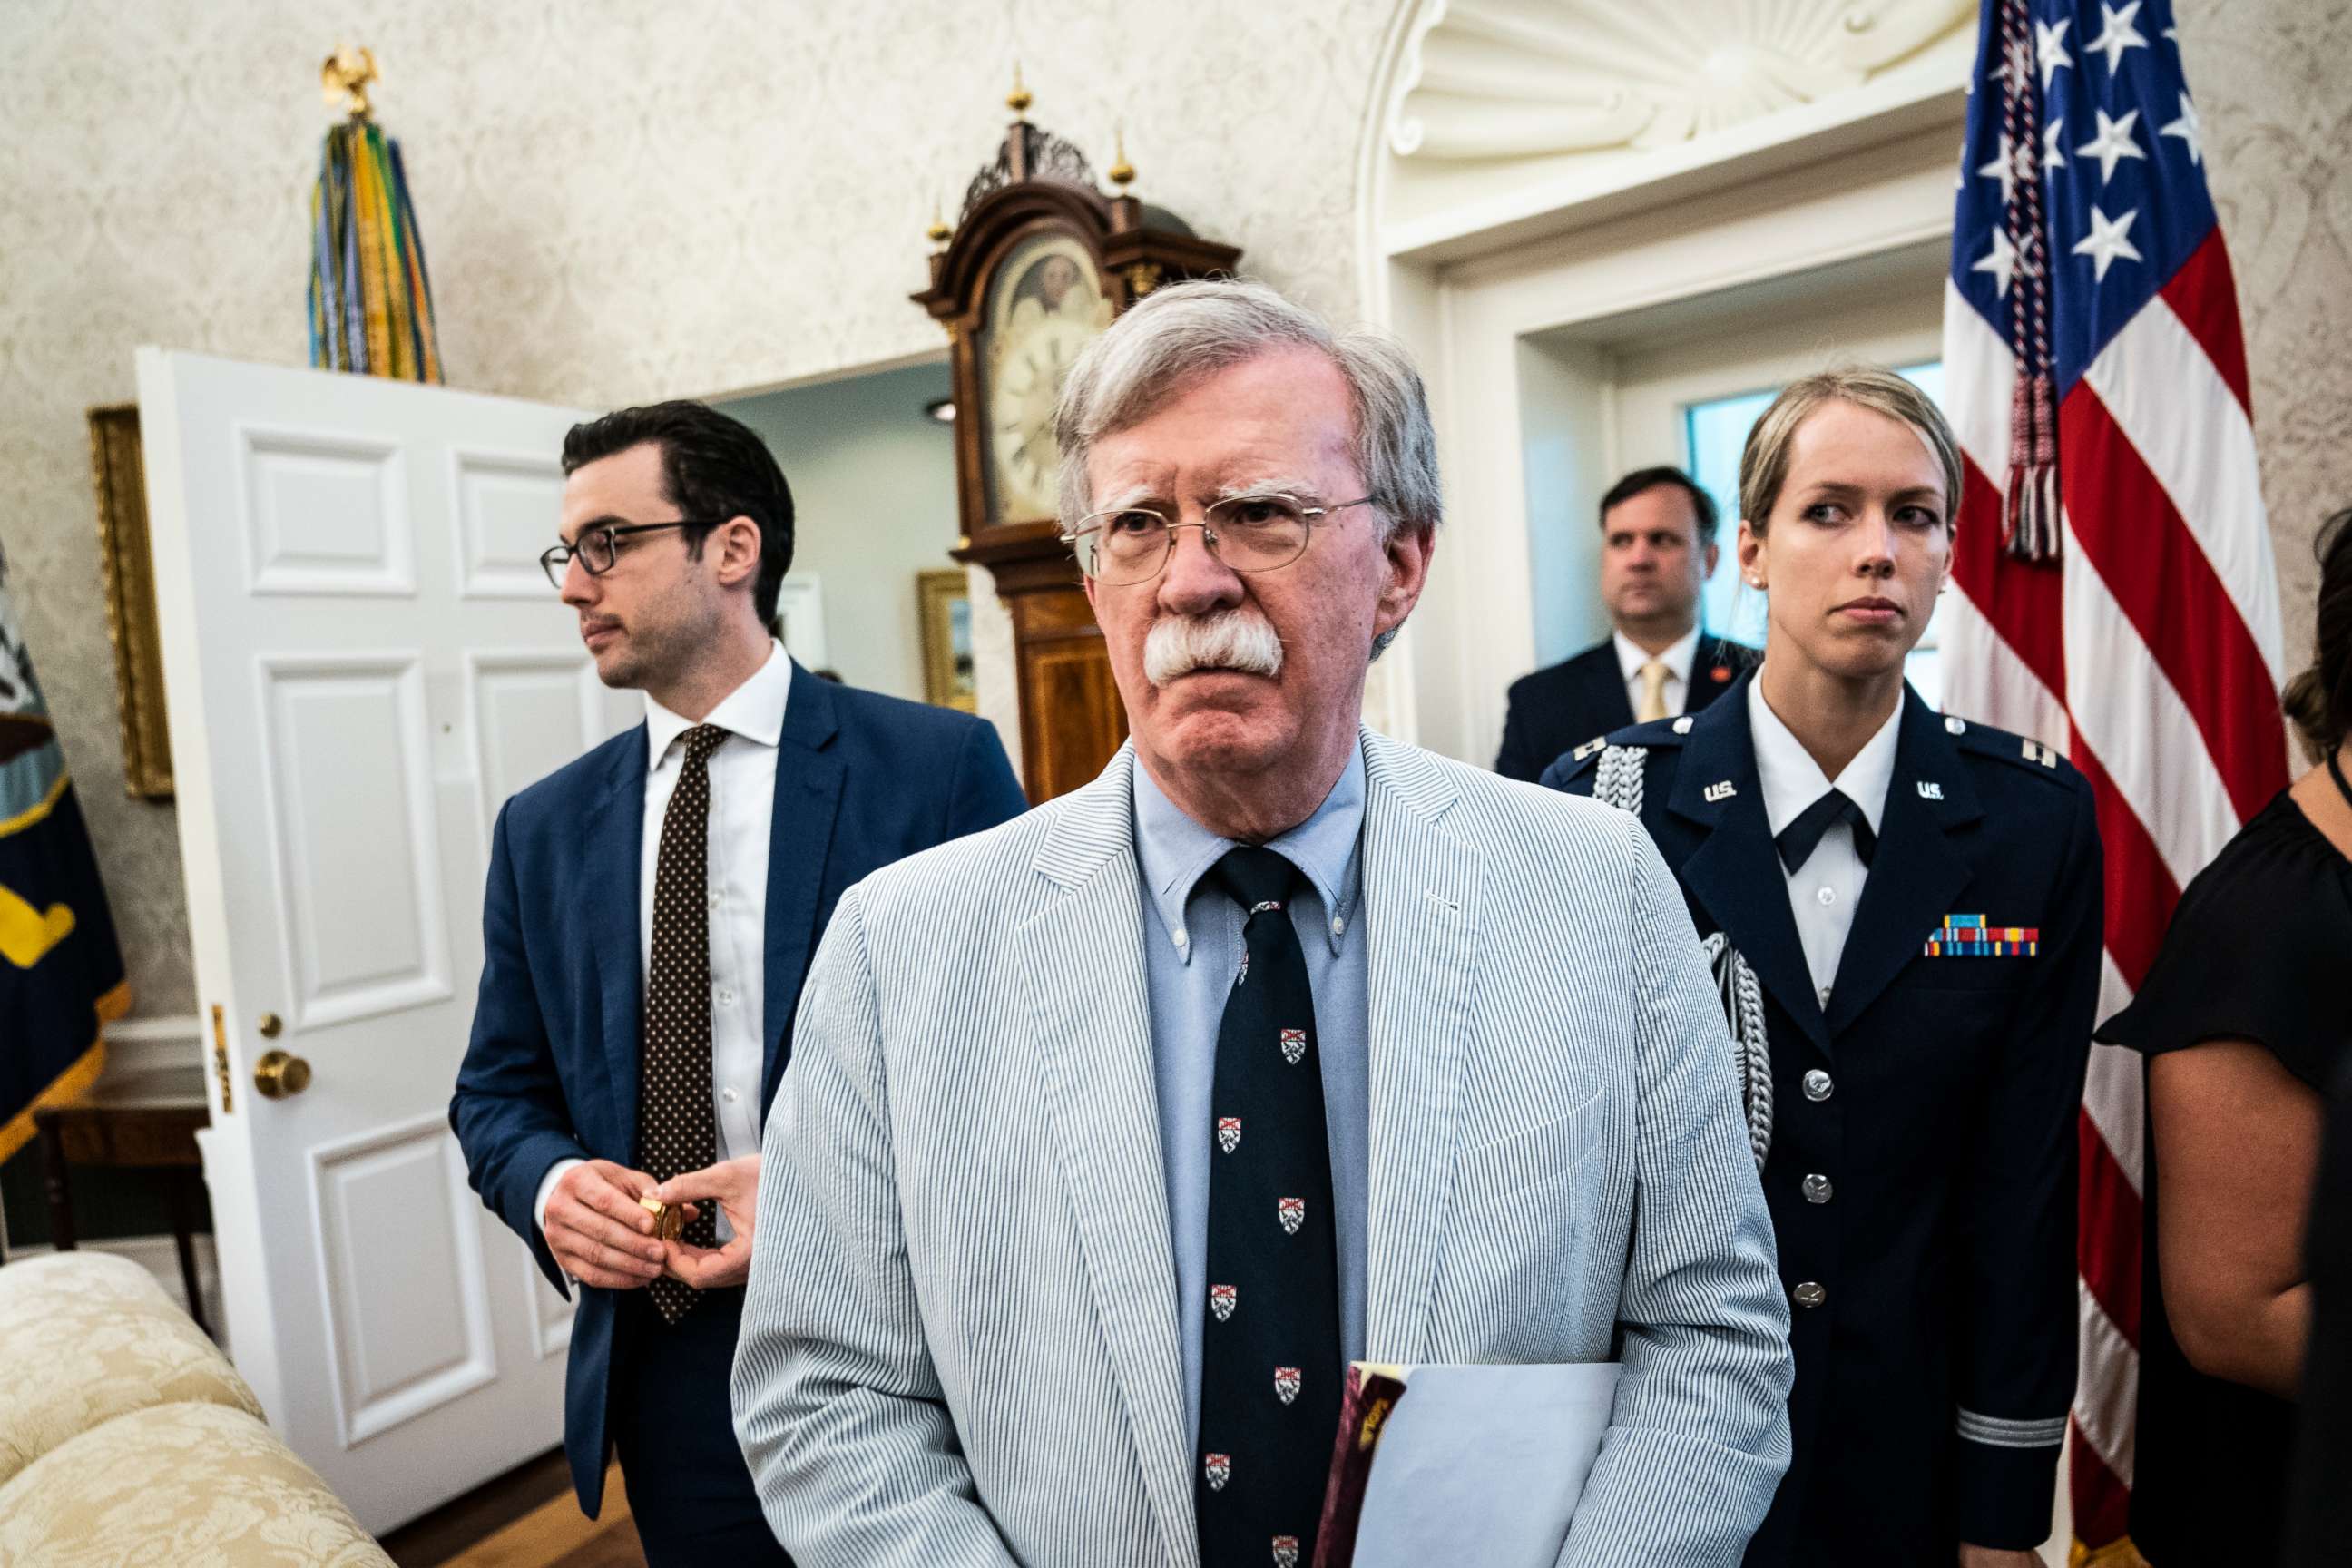 PHOTO: Then-National Security Advisor John R. Bolton attends an event in the Oval Office at the White House on July 19th, 2019, in Washington.